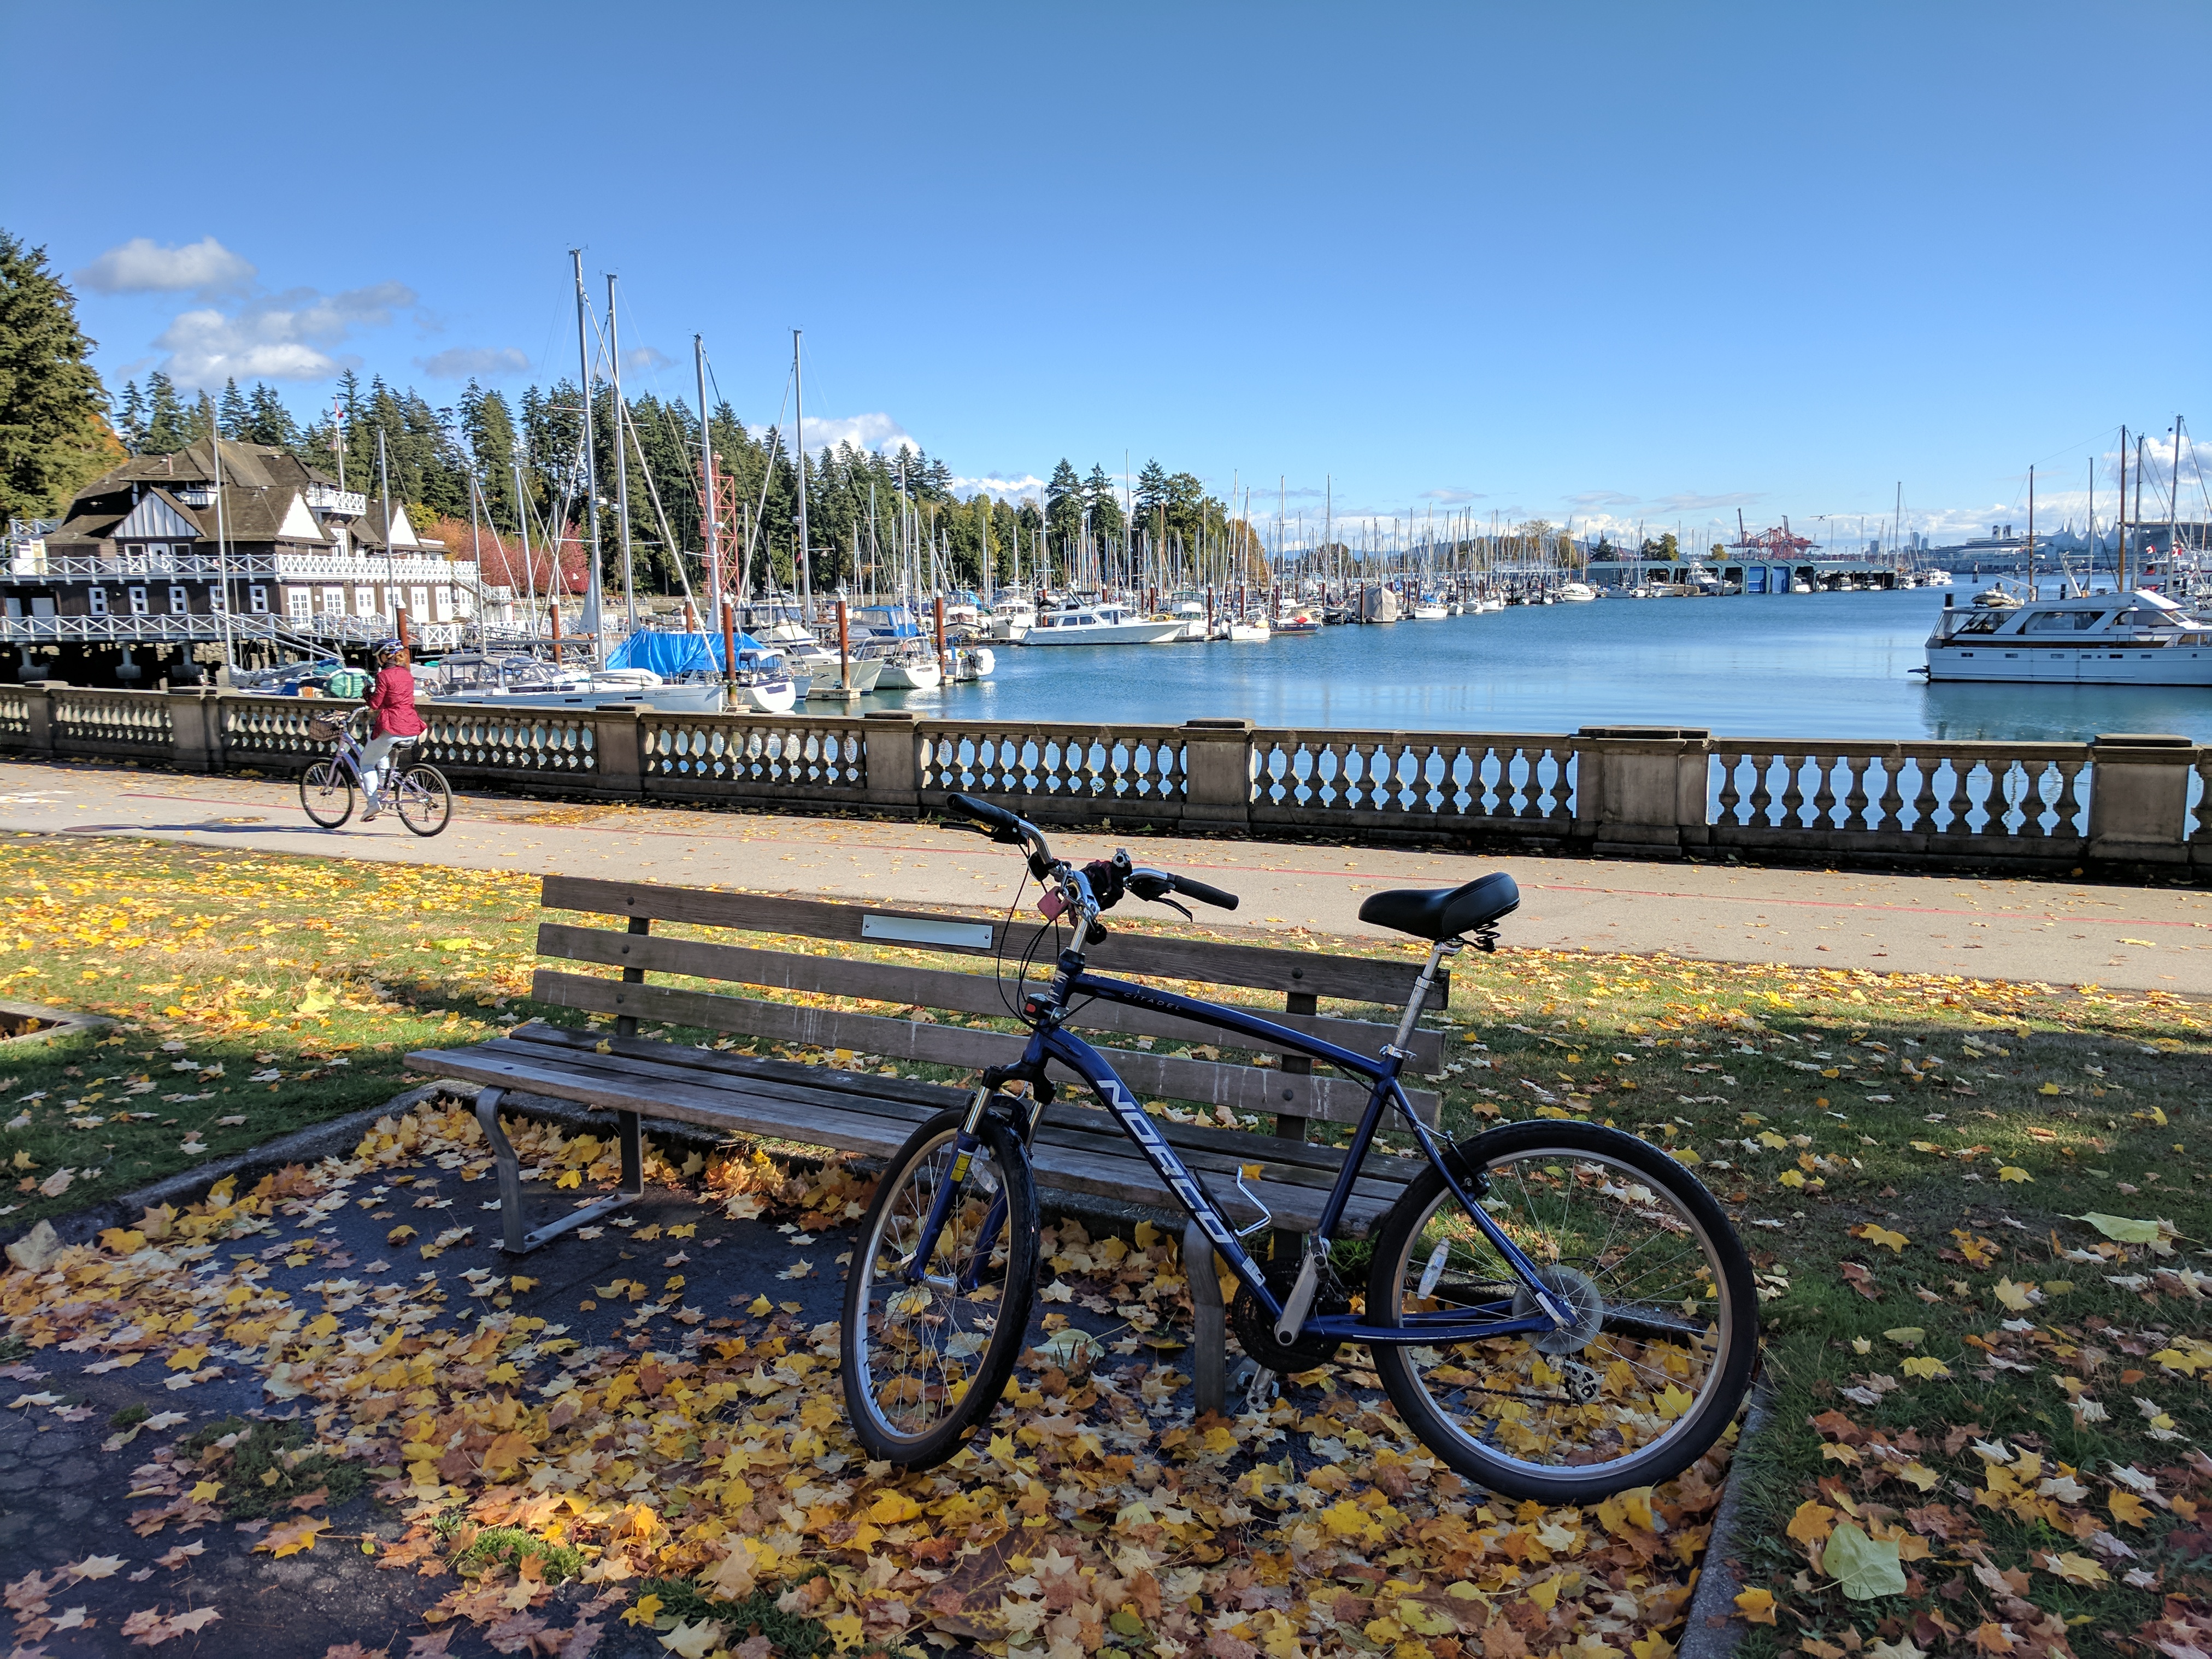 Sweet Norco bike propped up against the park bench, there's leaves all over the ground and sailboats berthed in the background.